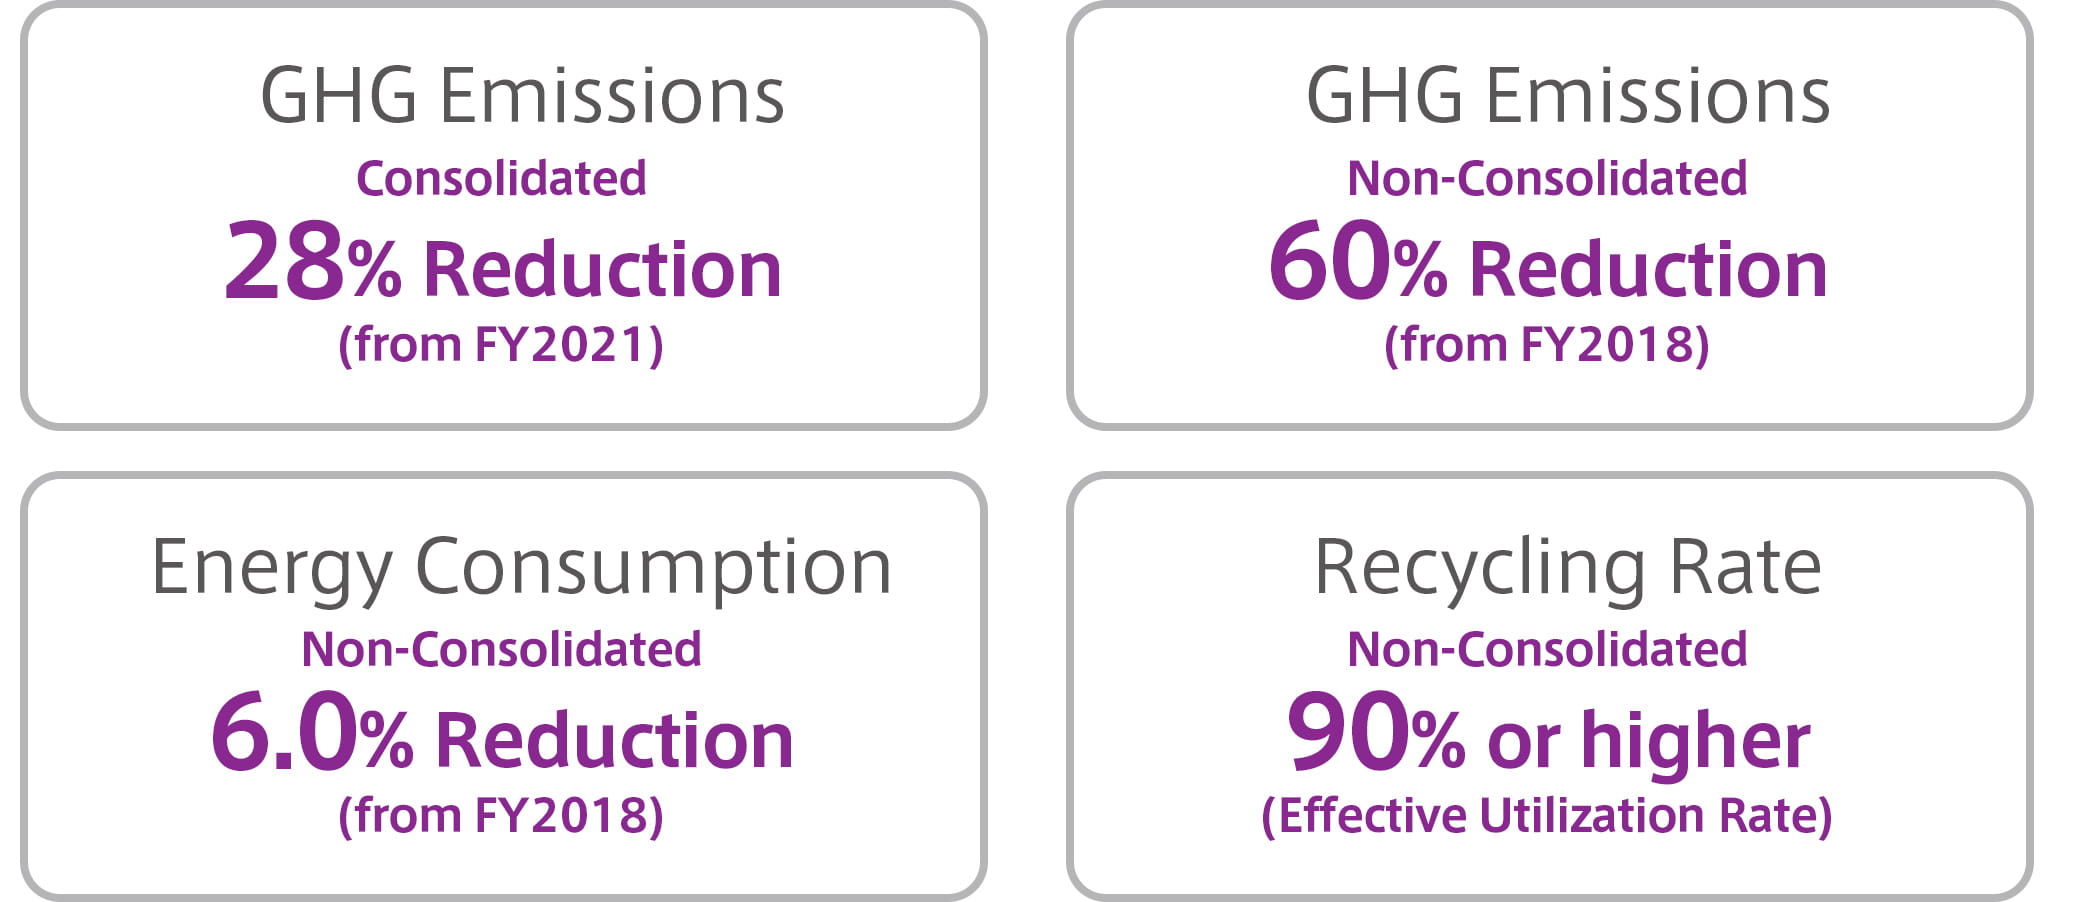 GHG Emissions: Consolidated 28% Reduction (from FY2021), GHG Emissions: Non-Consolidated 60% Reduction (from FY2018), Energy Consumption: Non-Consolidated 6.0% Reduction (from FY2018), Recycling Rate(Effective Utilization Rate): Non-Consolidated 90% or higher